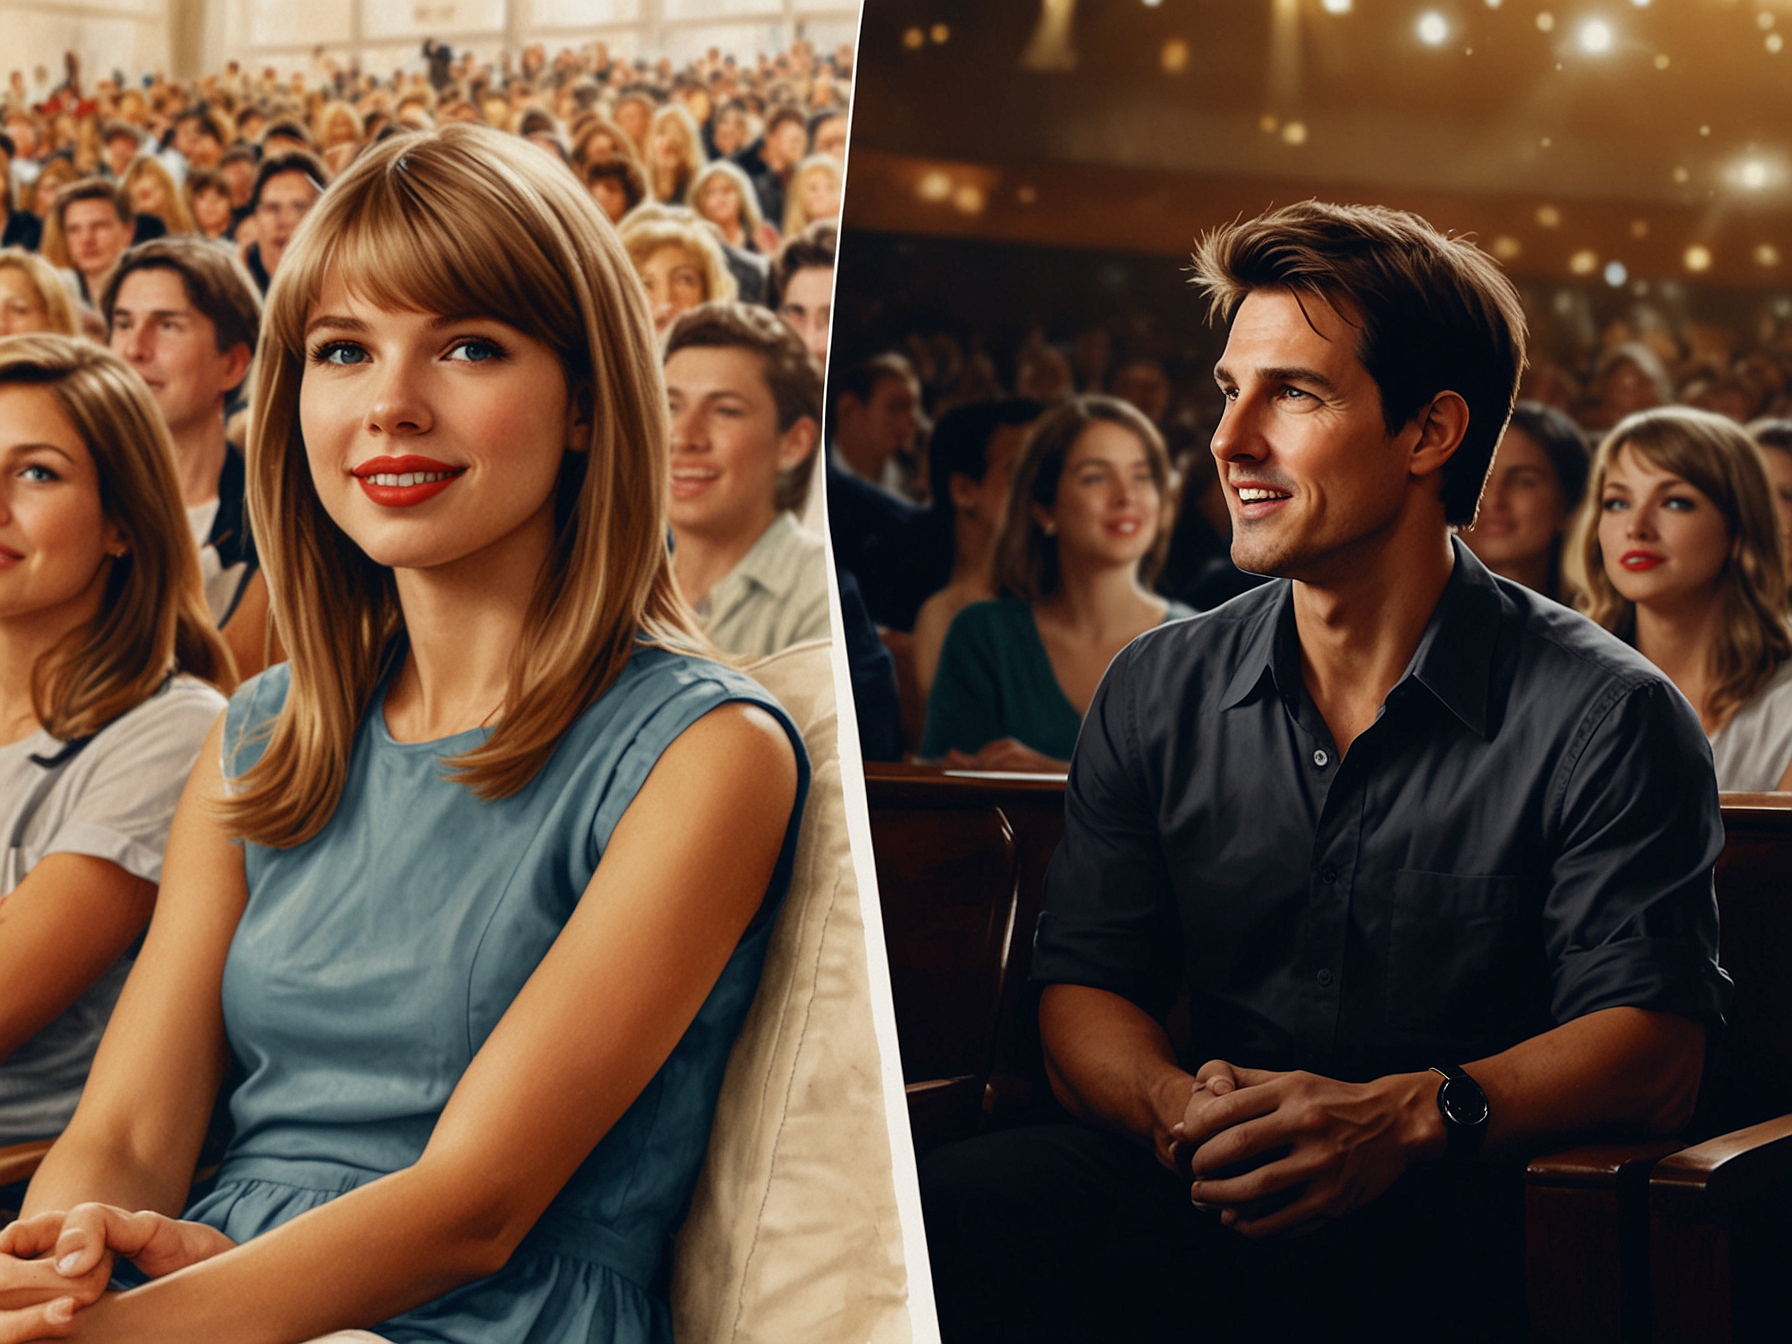 A contrasting split image: on one side, Tom Cruise enjoying Taylor Swift’s concert, and on the other, a silhouette of a graduation ceremony, representing Cruise’s absence from his daughter Suri's graduation.